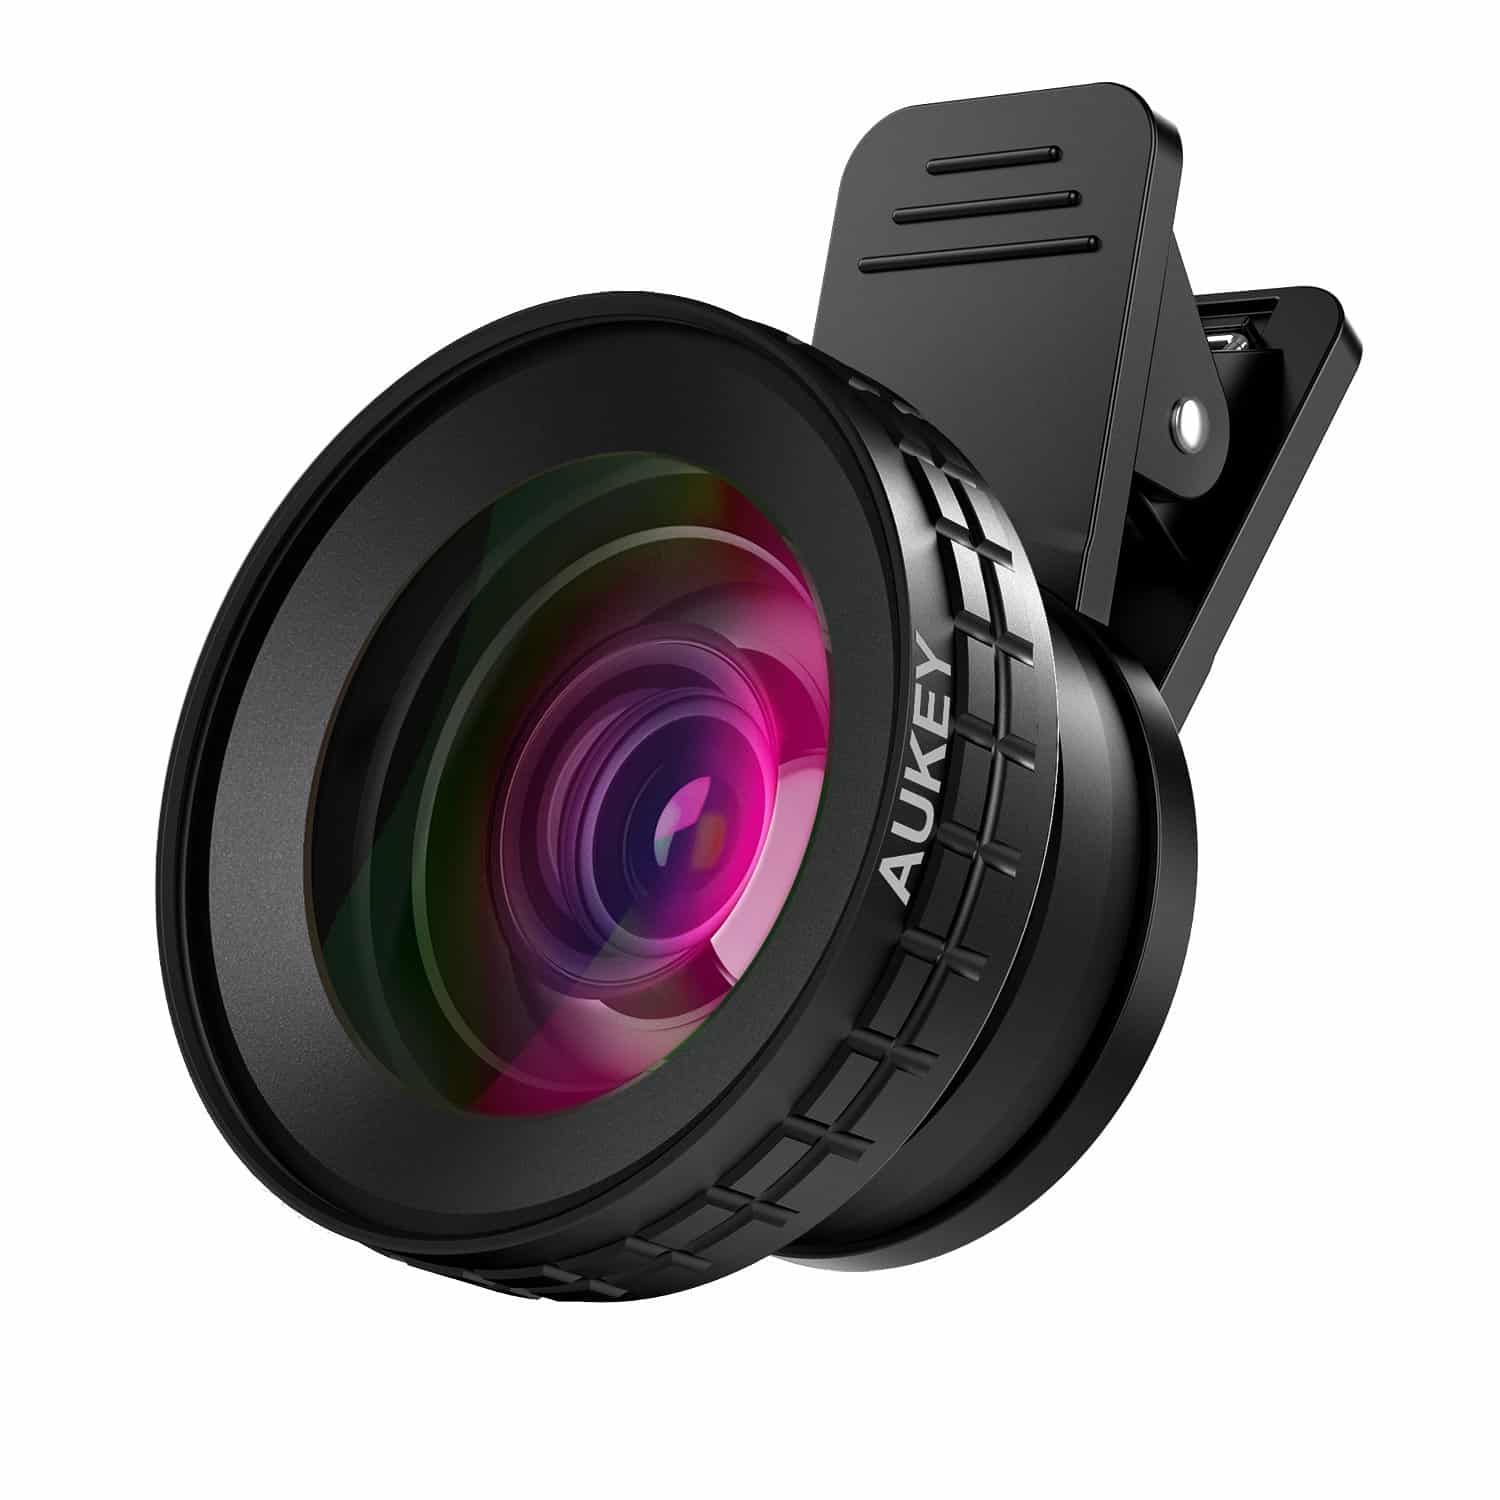 DEAL ALERT: AUKEY Ora iPhone Lens, 0.45x 140° Wide Angle + 10x Macro Clip-on Cell Phone Camera Lenses Kit for Samsung, Android Smartphones, iPhone